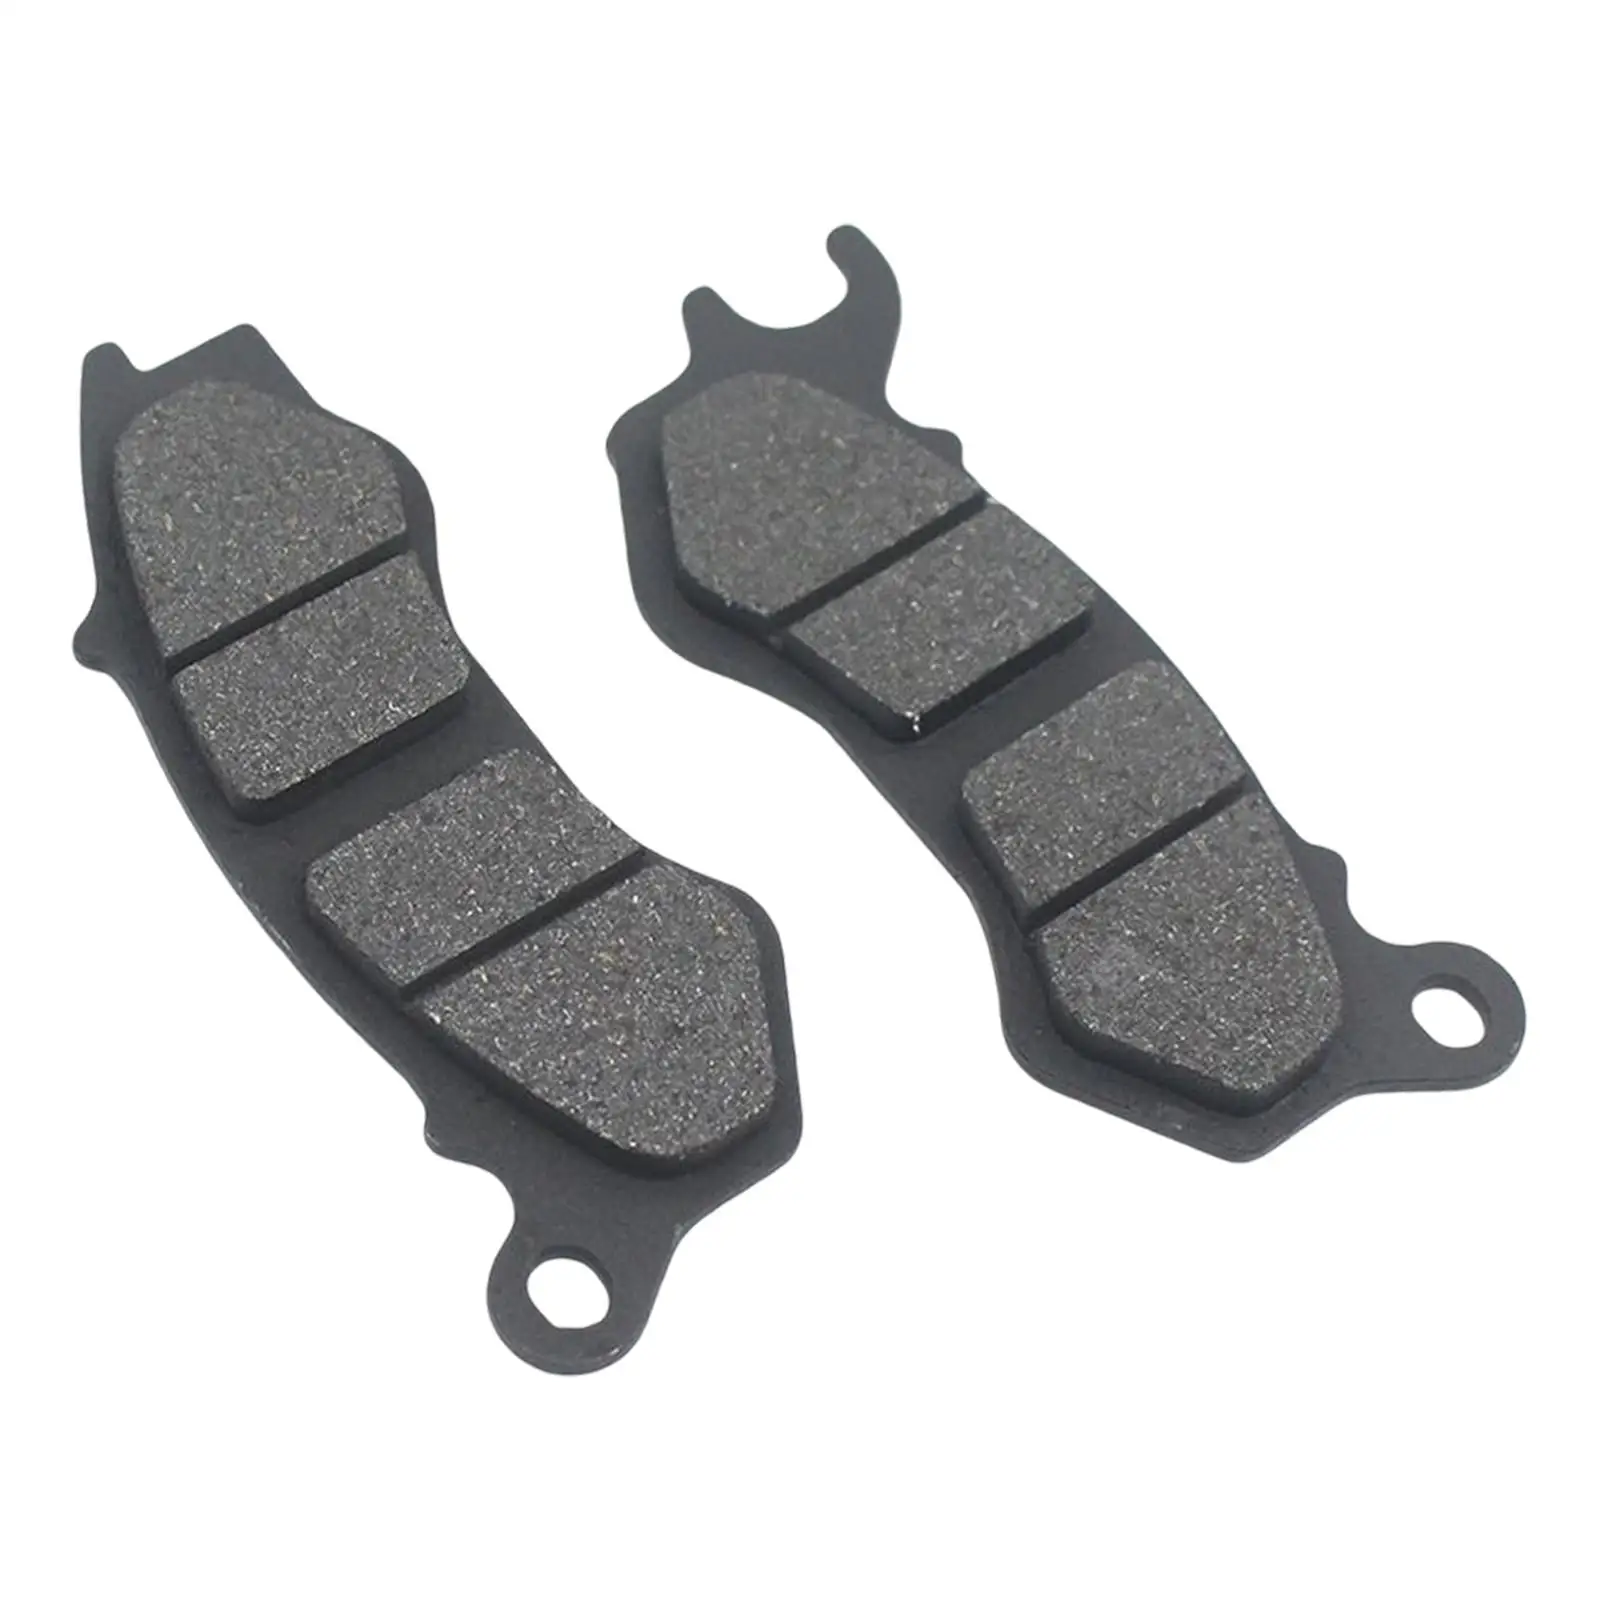 Front Brake Pads for Honda PCX 125 150 - High-Quality Wood Material, Eas... - £16.17 GBP